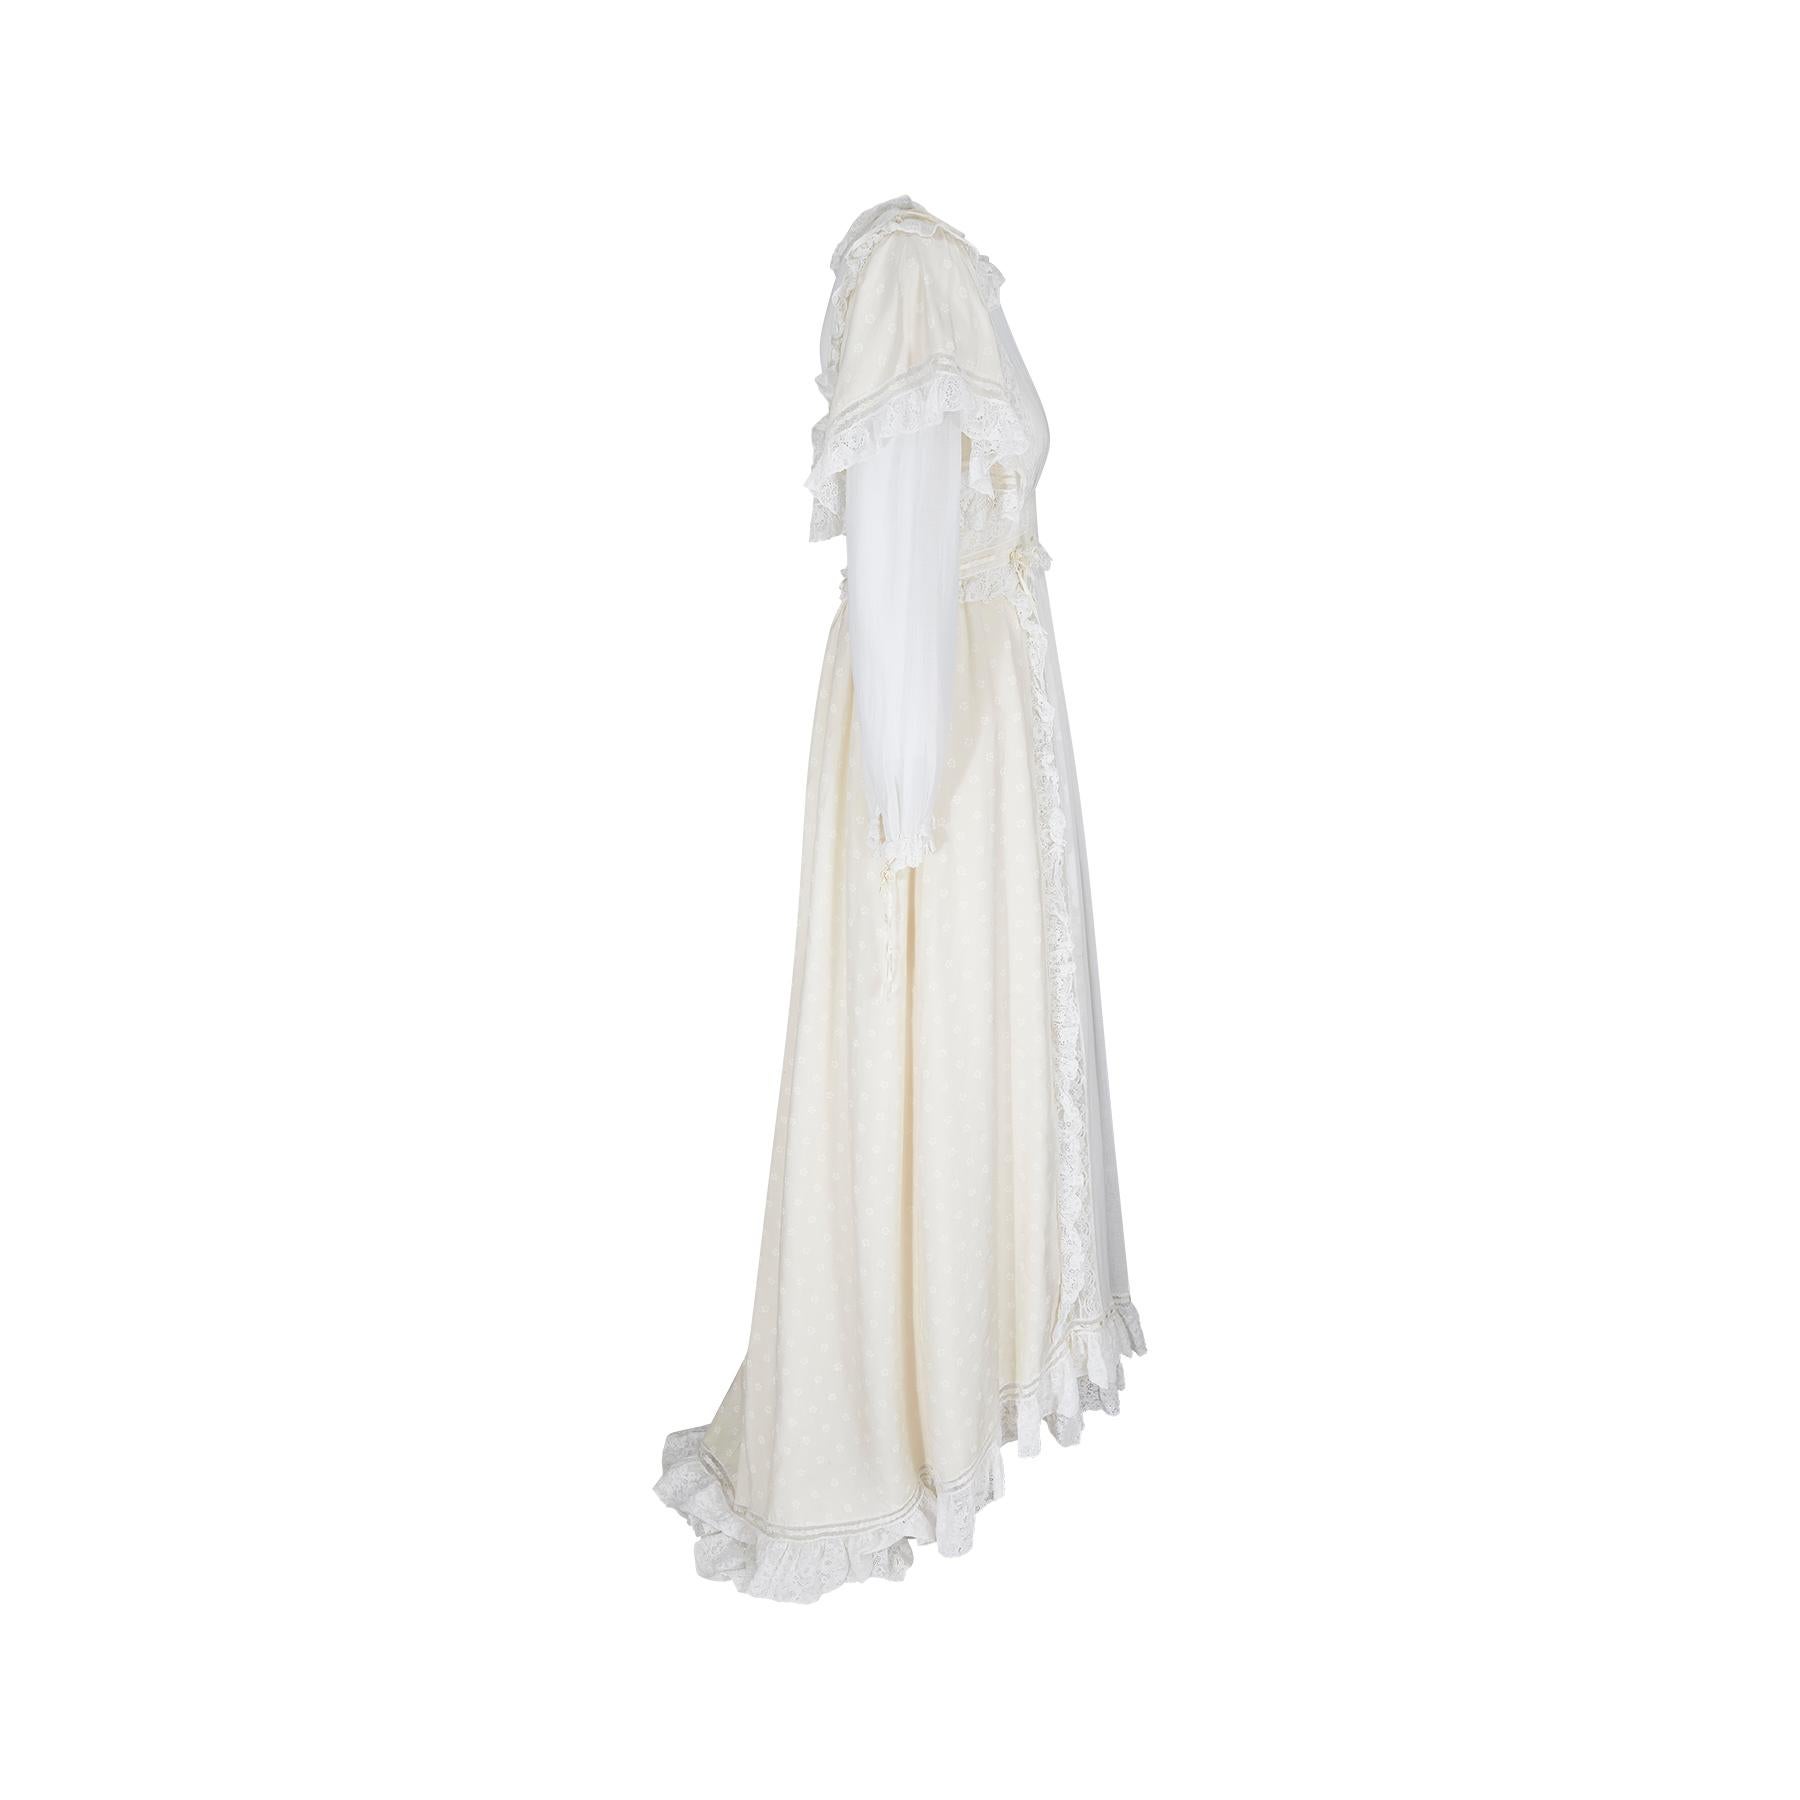 A fine and rare 1970s Gina Fratini cream silk and cotton mousseline dress which really encapsulates the bohemian aesthetic and was almost certainly commissioned as a wedding dress or for a very special event.  Gina was renowned for her romantic and